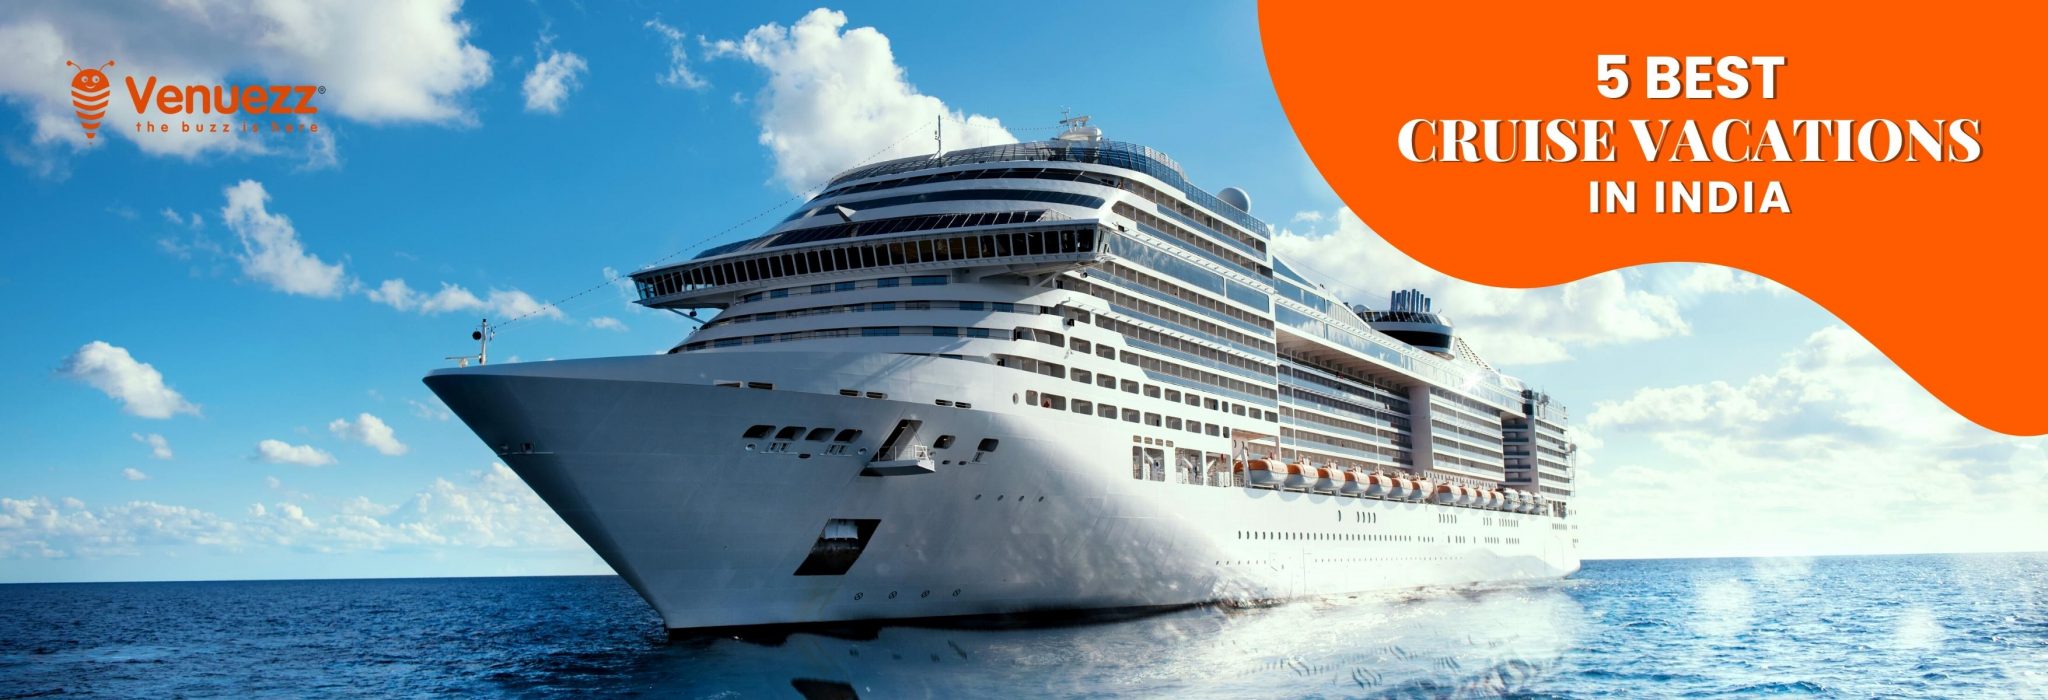 Top 5 Cruise Vacations in Indian Tourism Sector_slider_venuezz